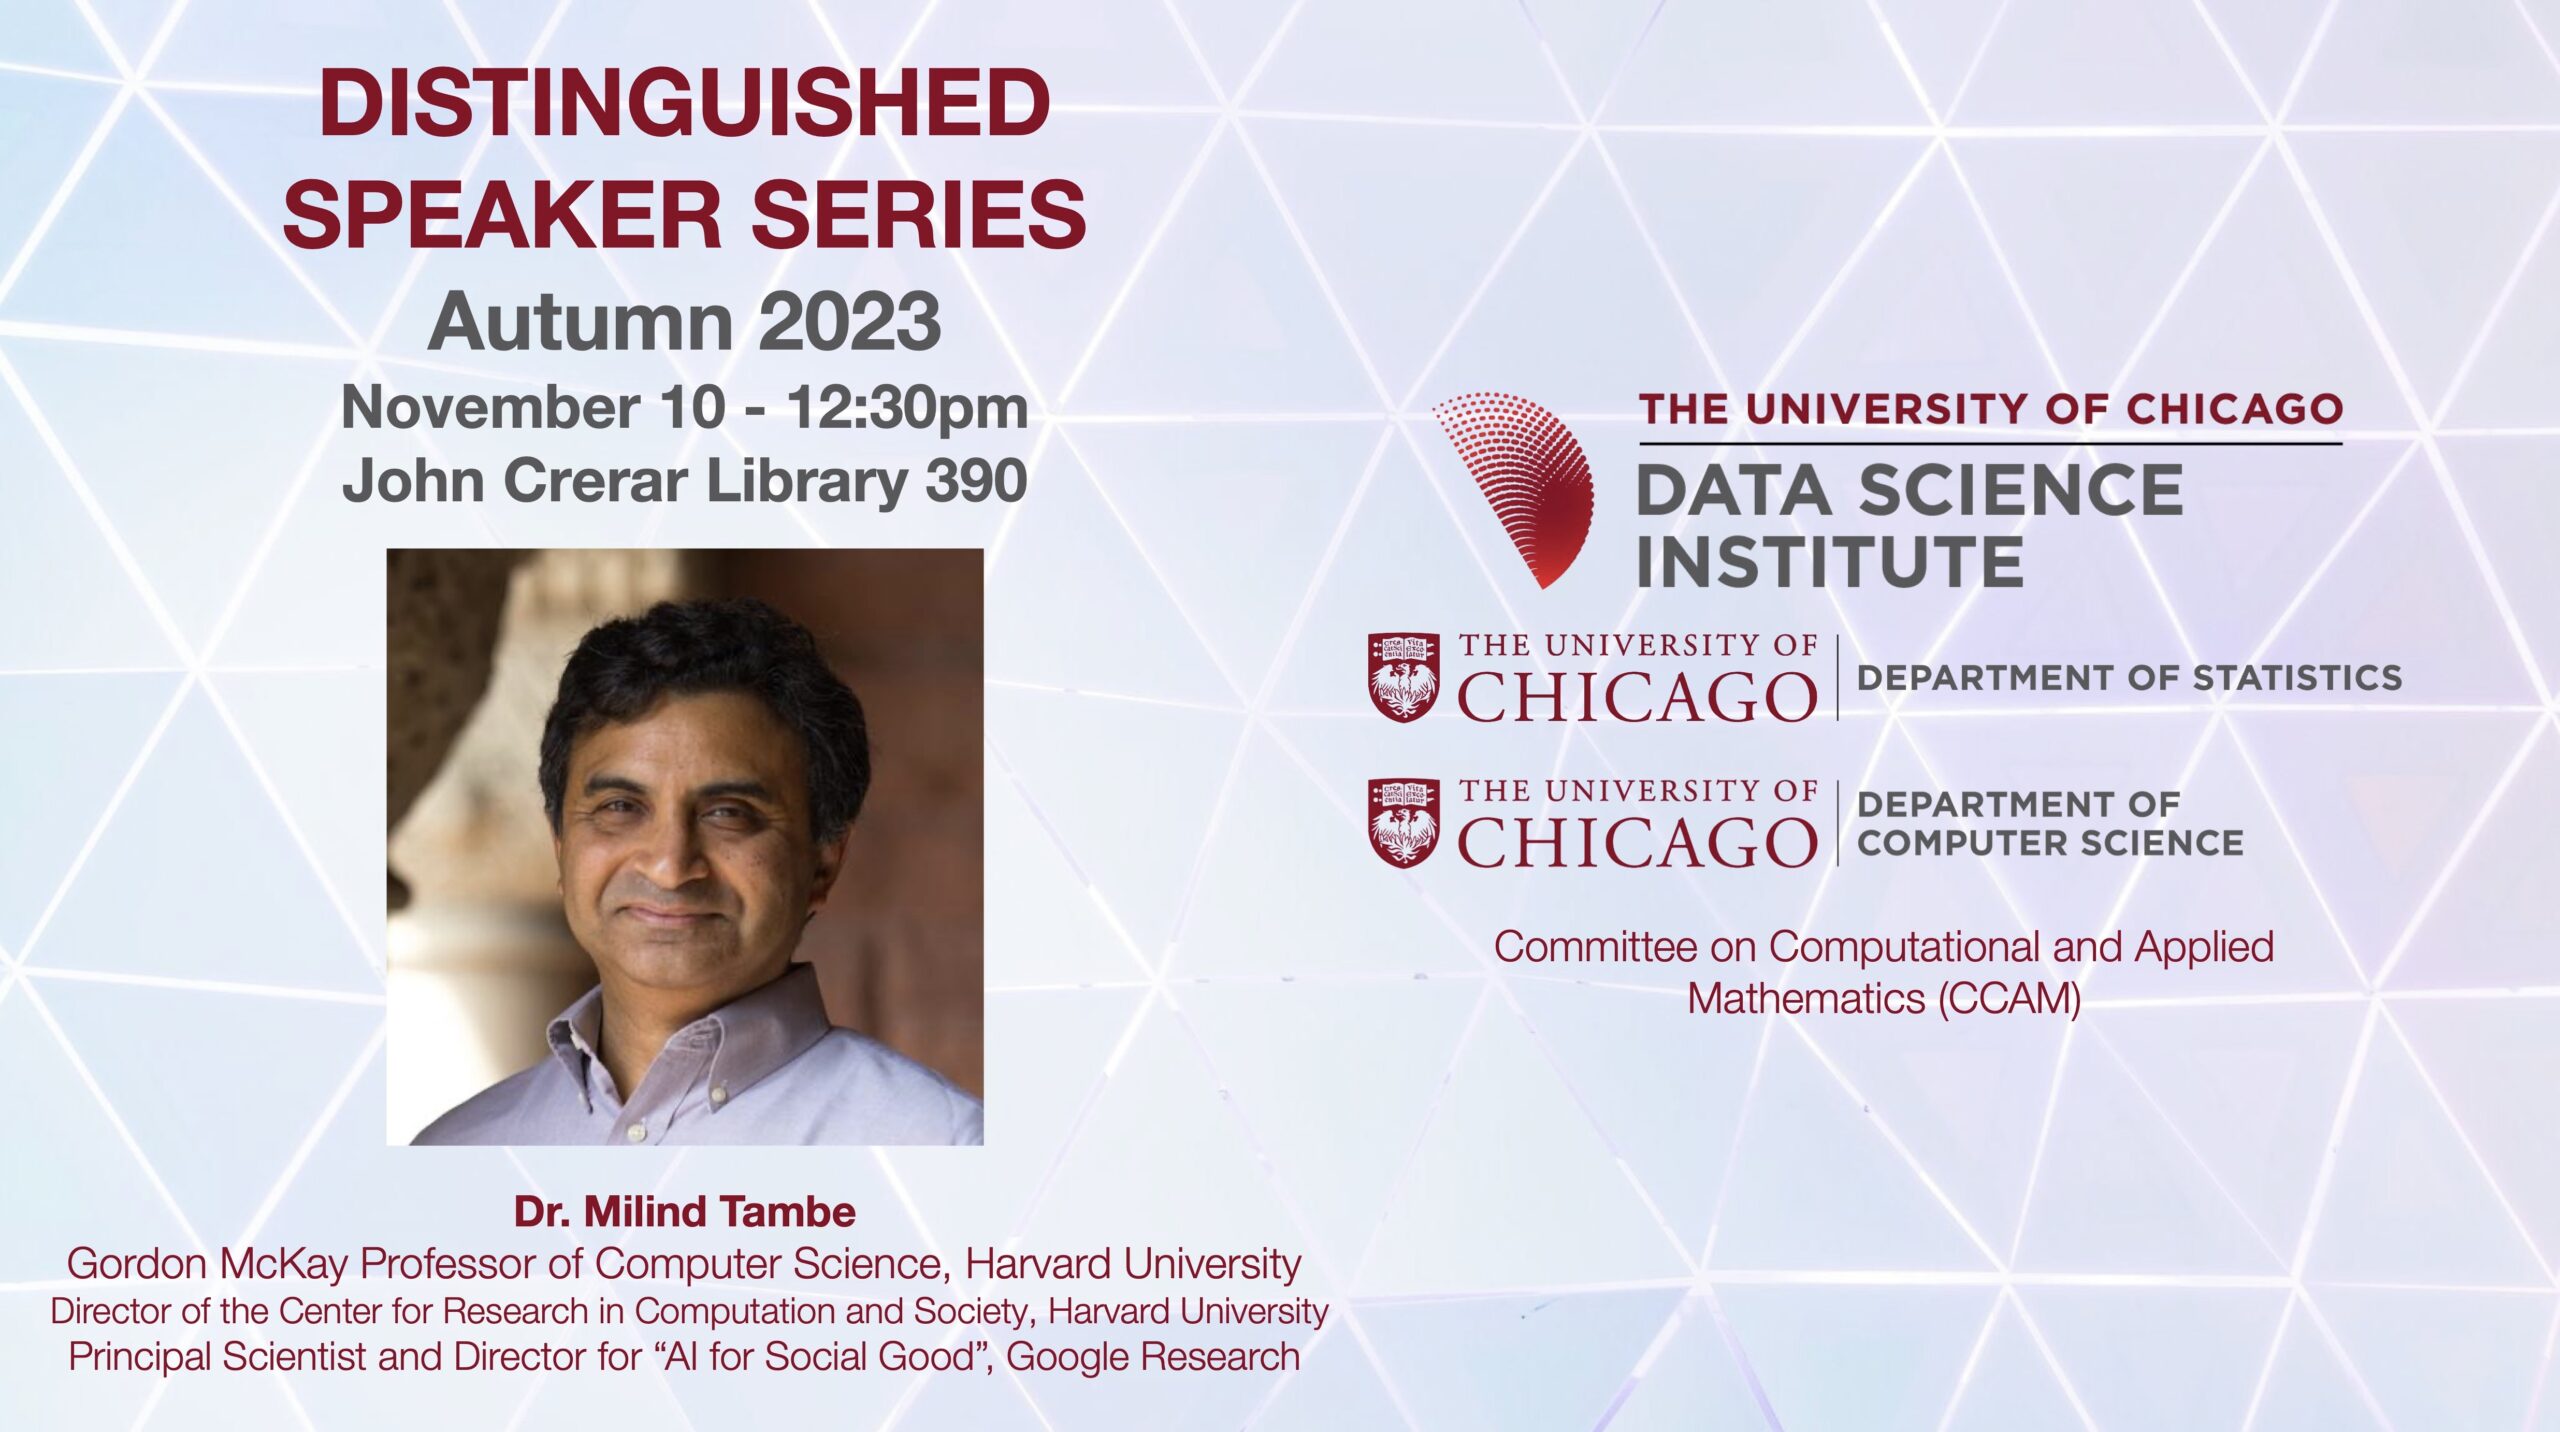 A headshot of Milind Tambe is accompanied by text describing the Distinguished Speaker Series event: it takes place at 12:30pm in John Crerar Library Room 390.